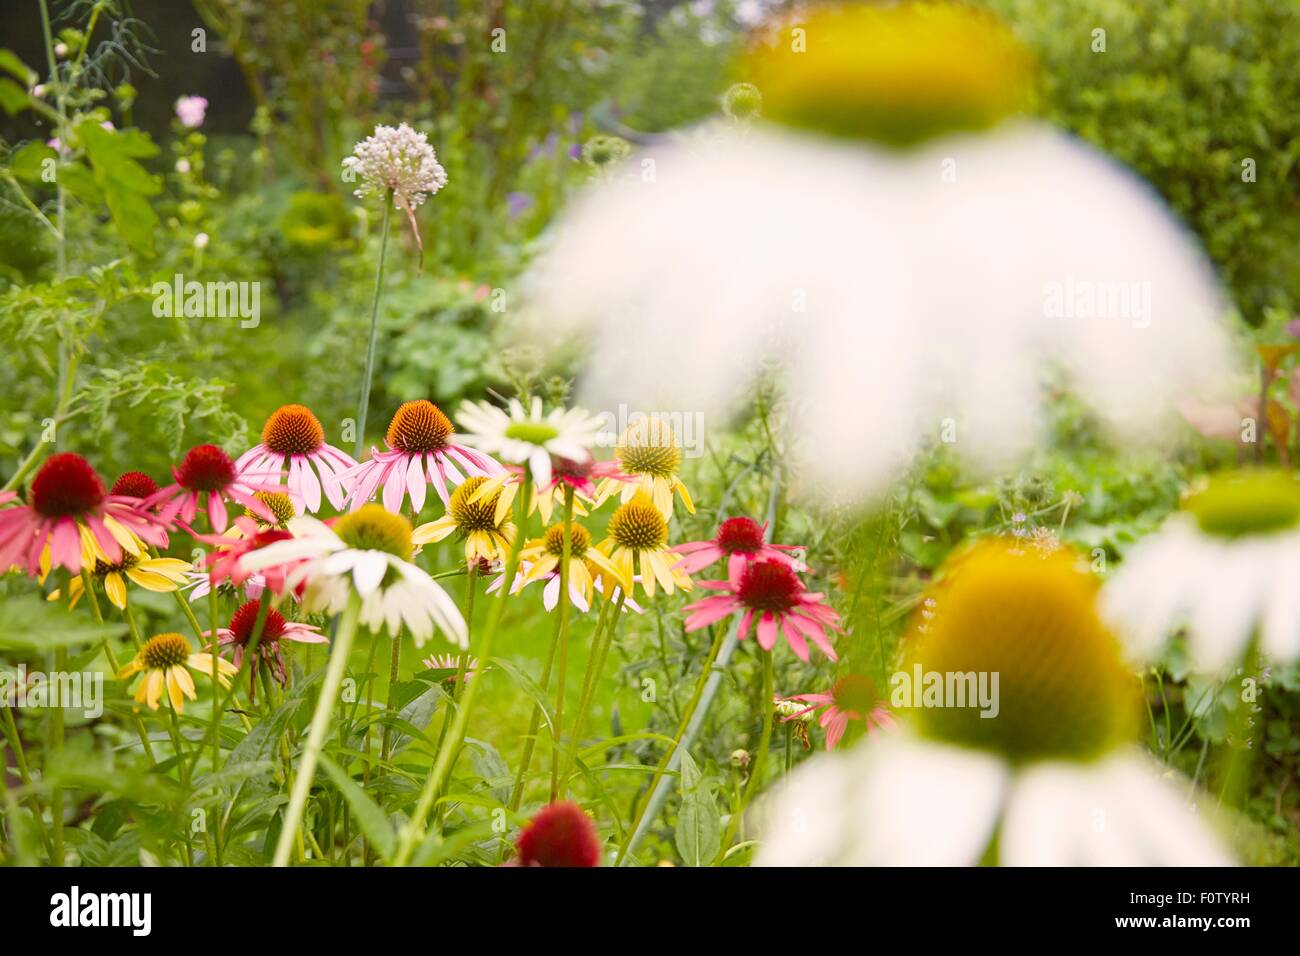 Close up of white and yellow echinacea flowers in herb garden Stock Photo